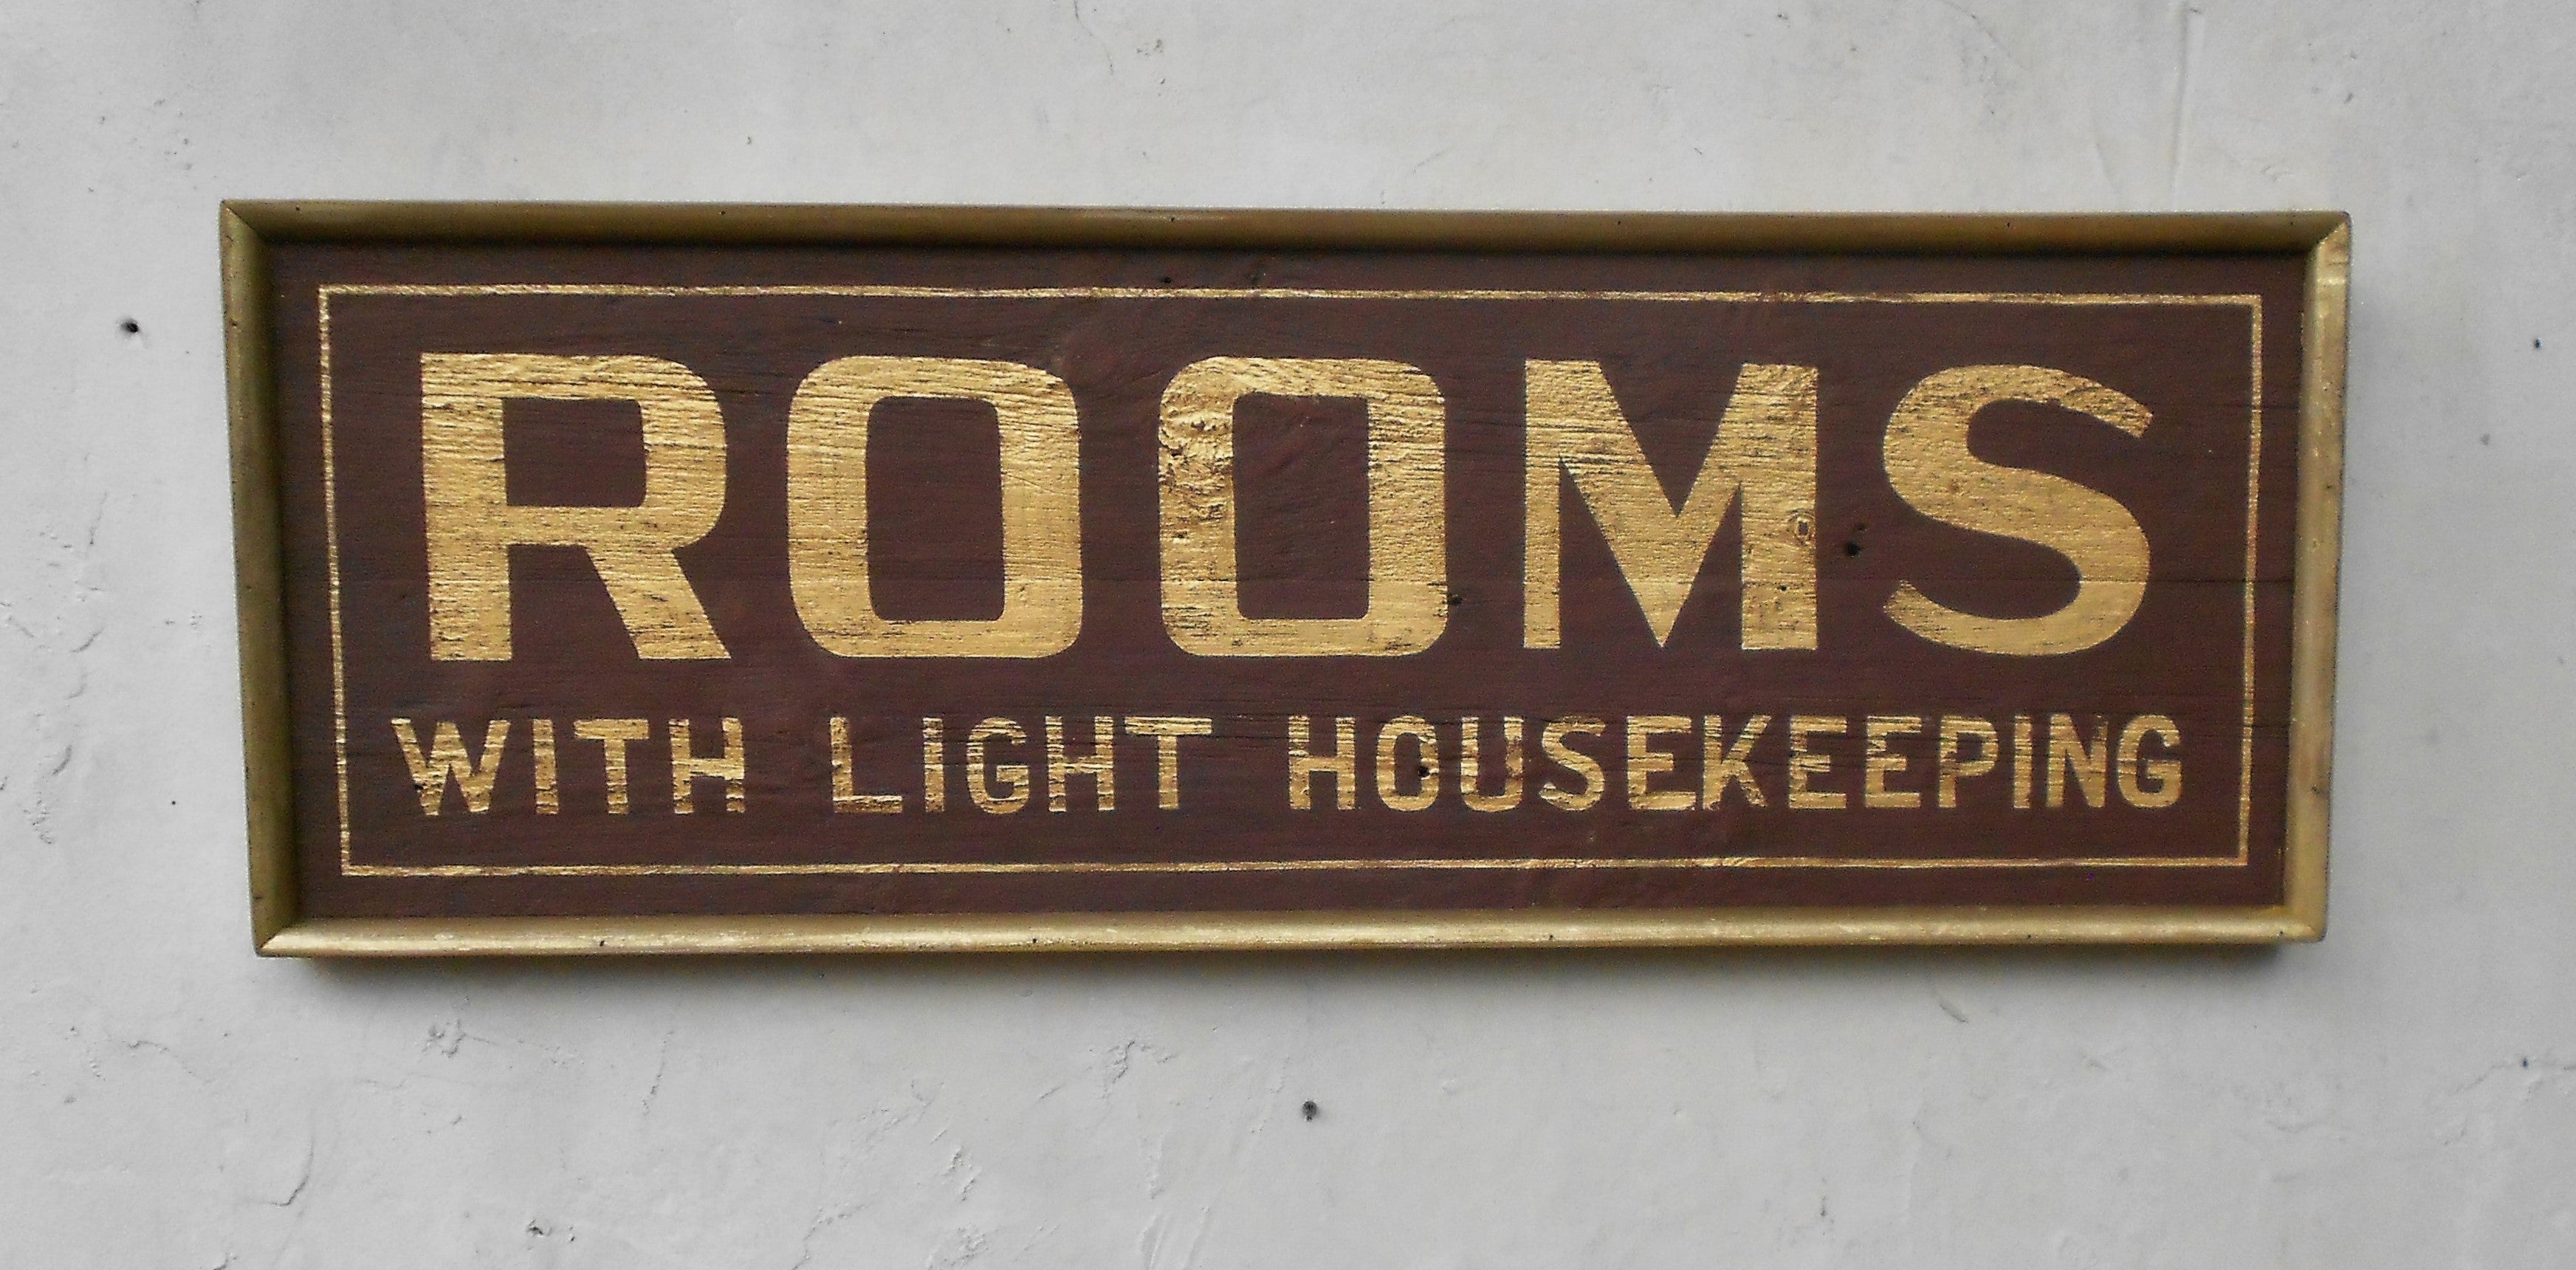 Rooms With Light Housekeeping